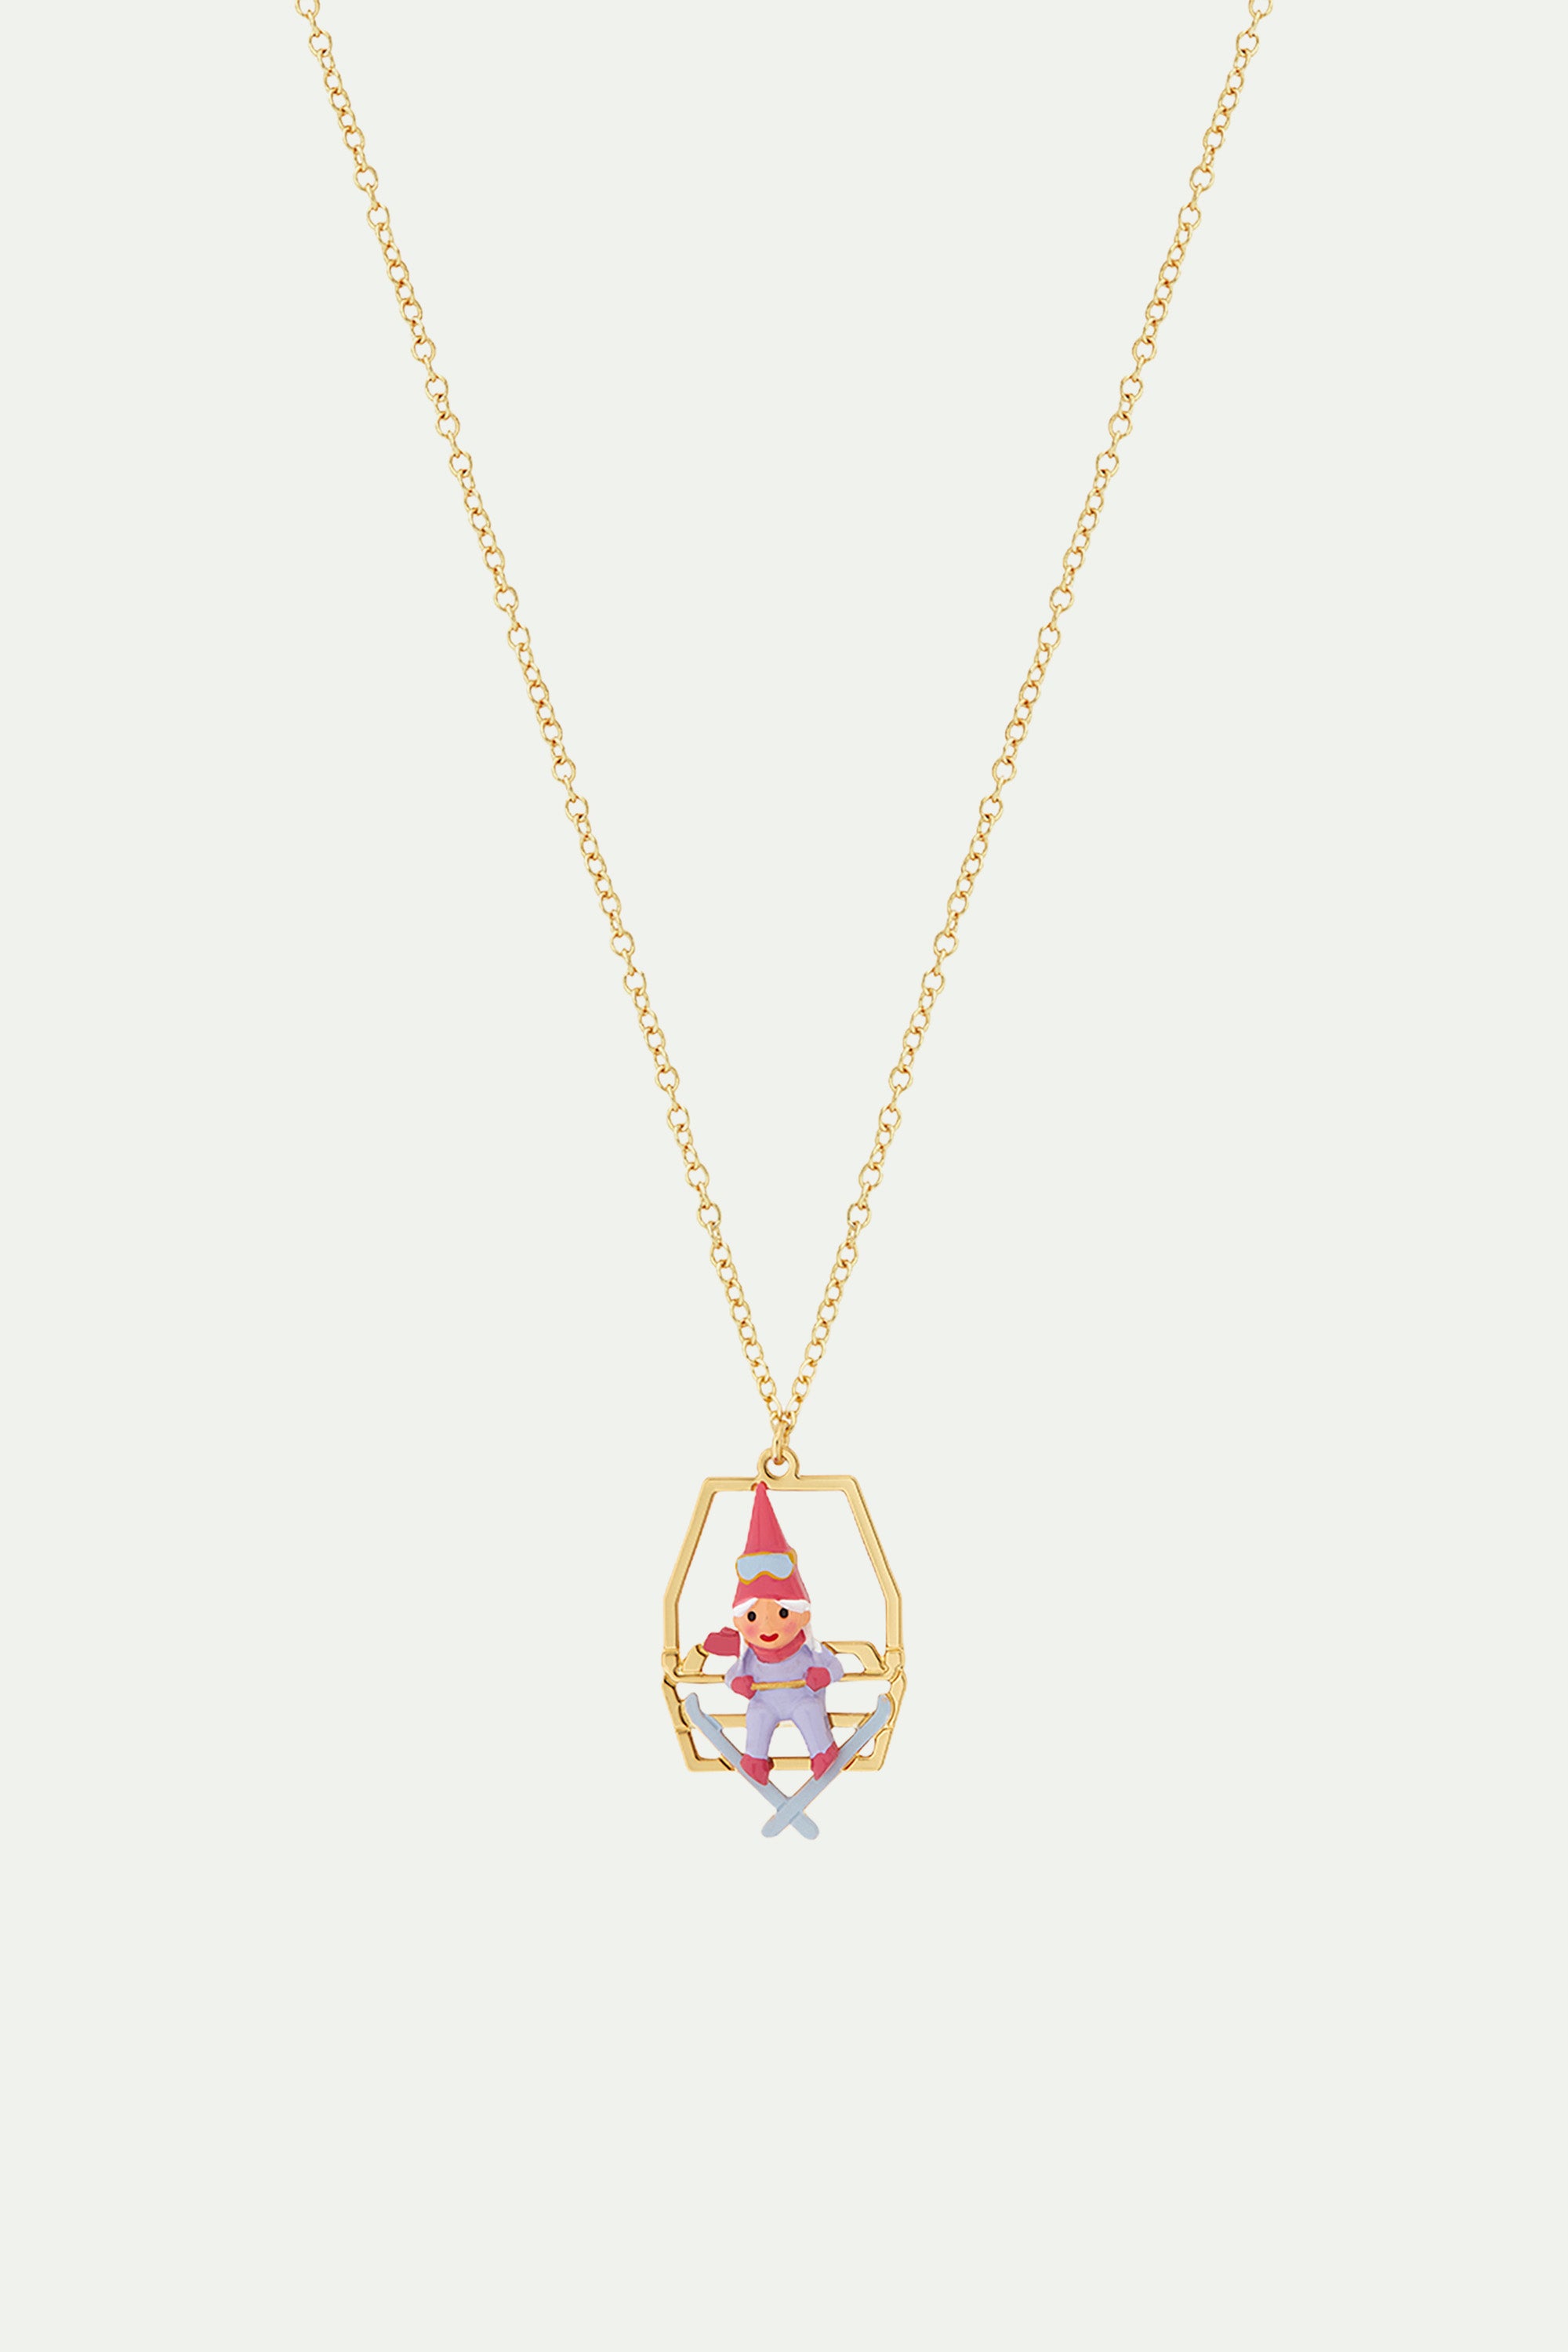 Garden gnome and chairlift pendant necklace